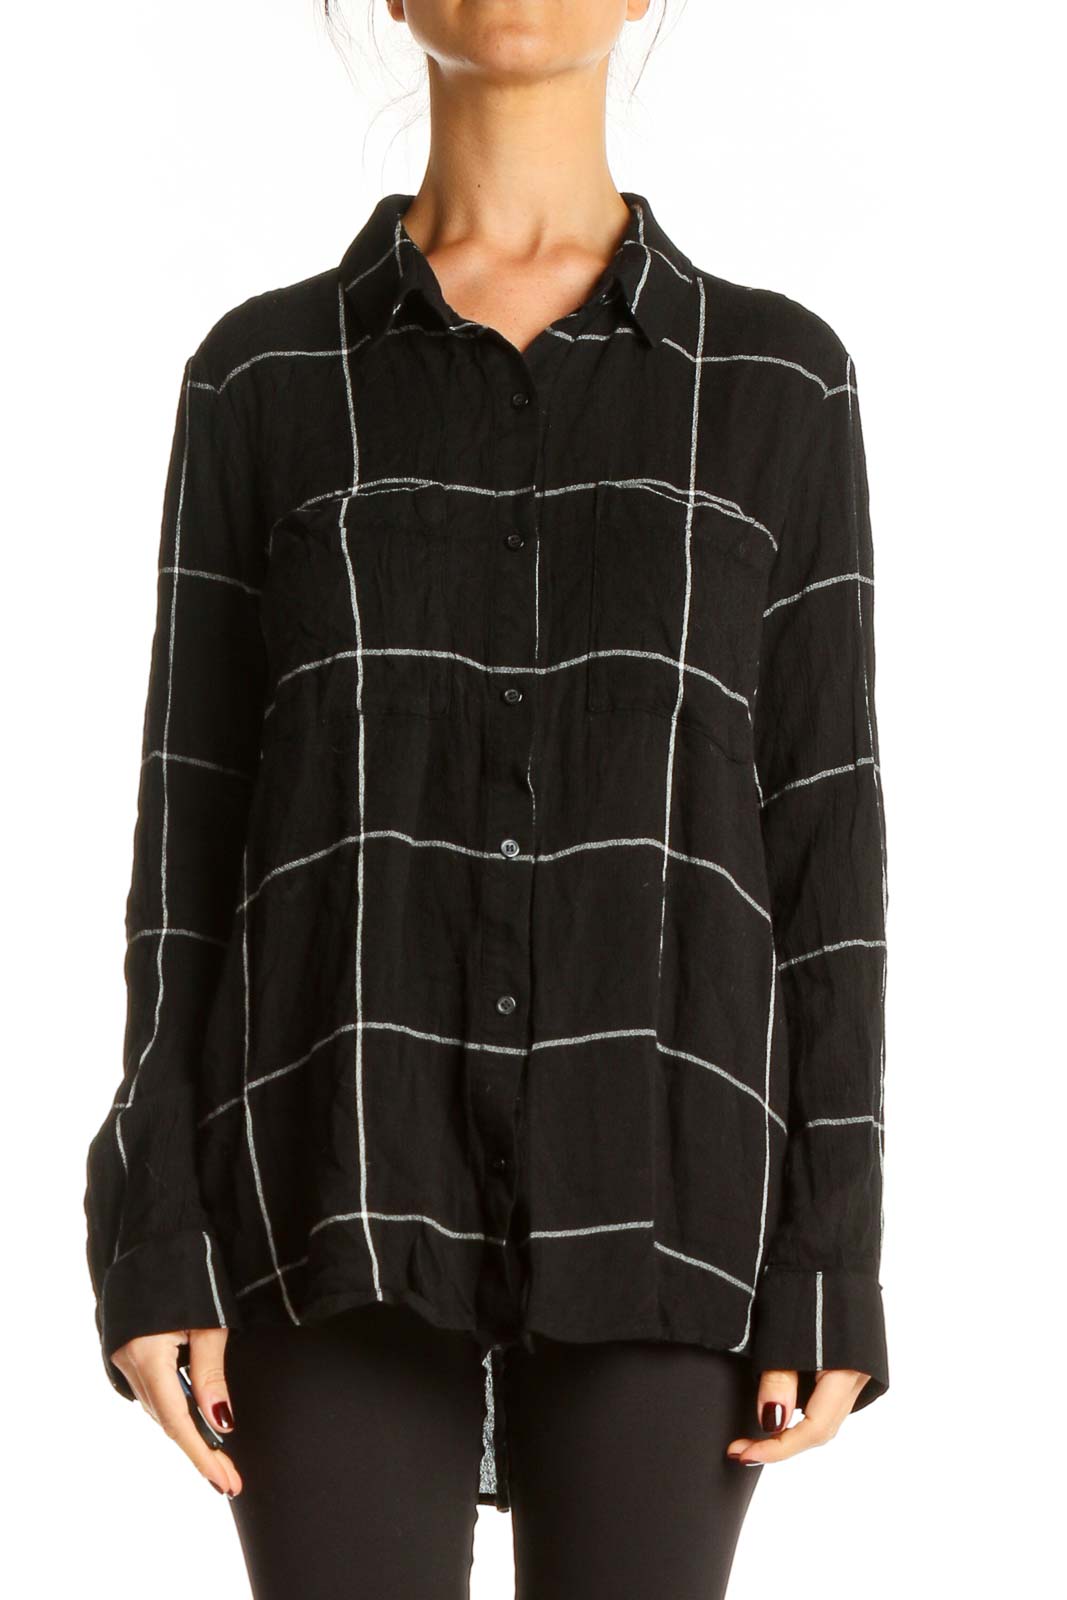 Black Checkered Casual Top Front